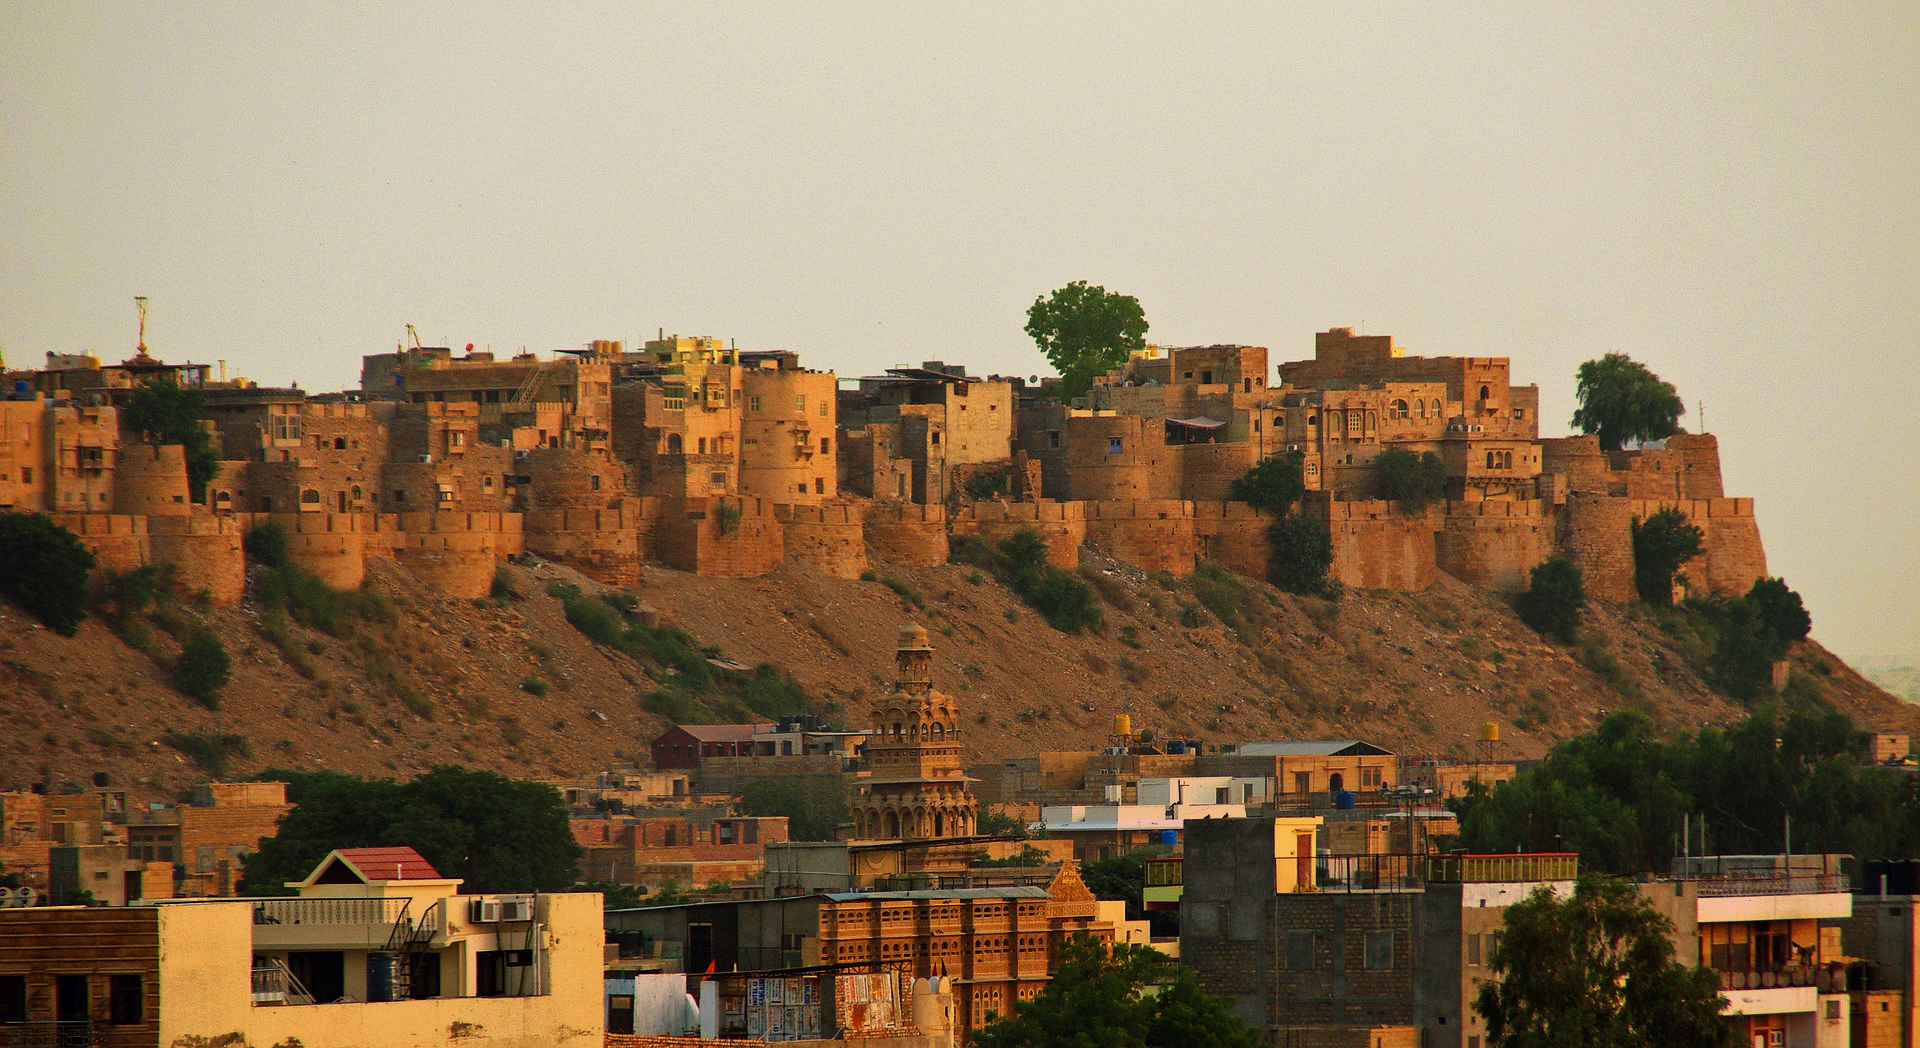 Views of houses in Jaisalmer, India